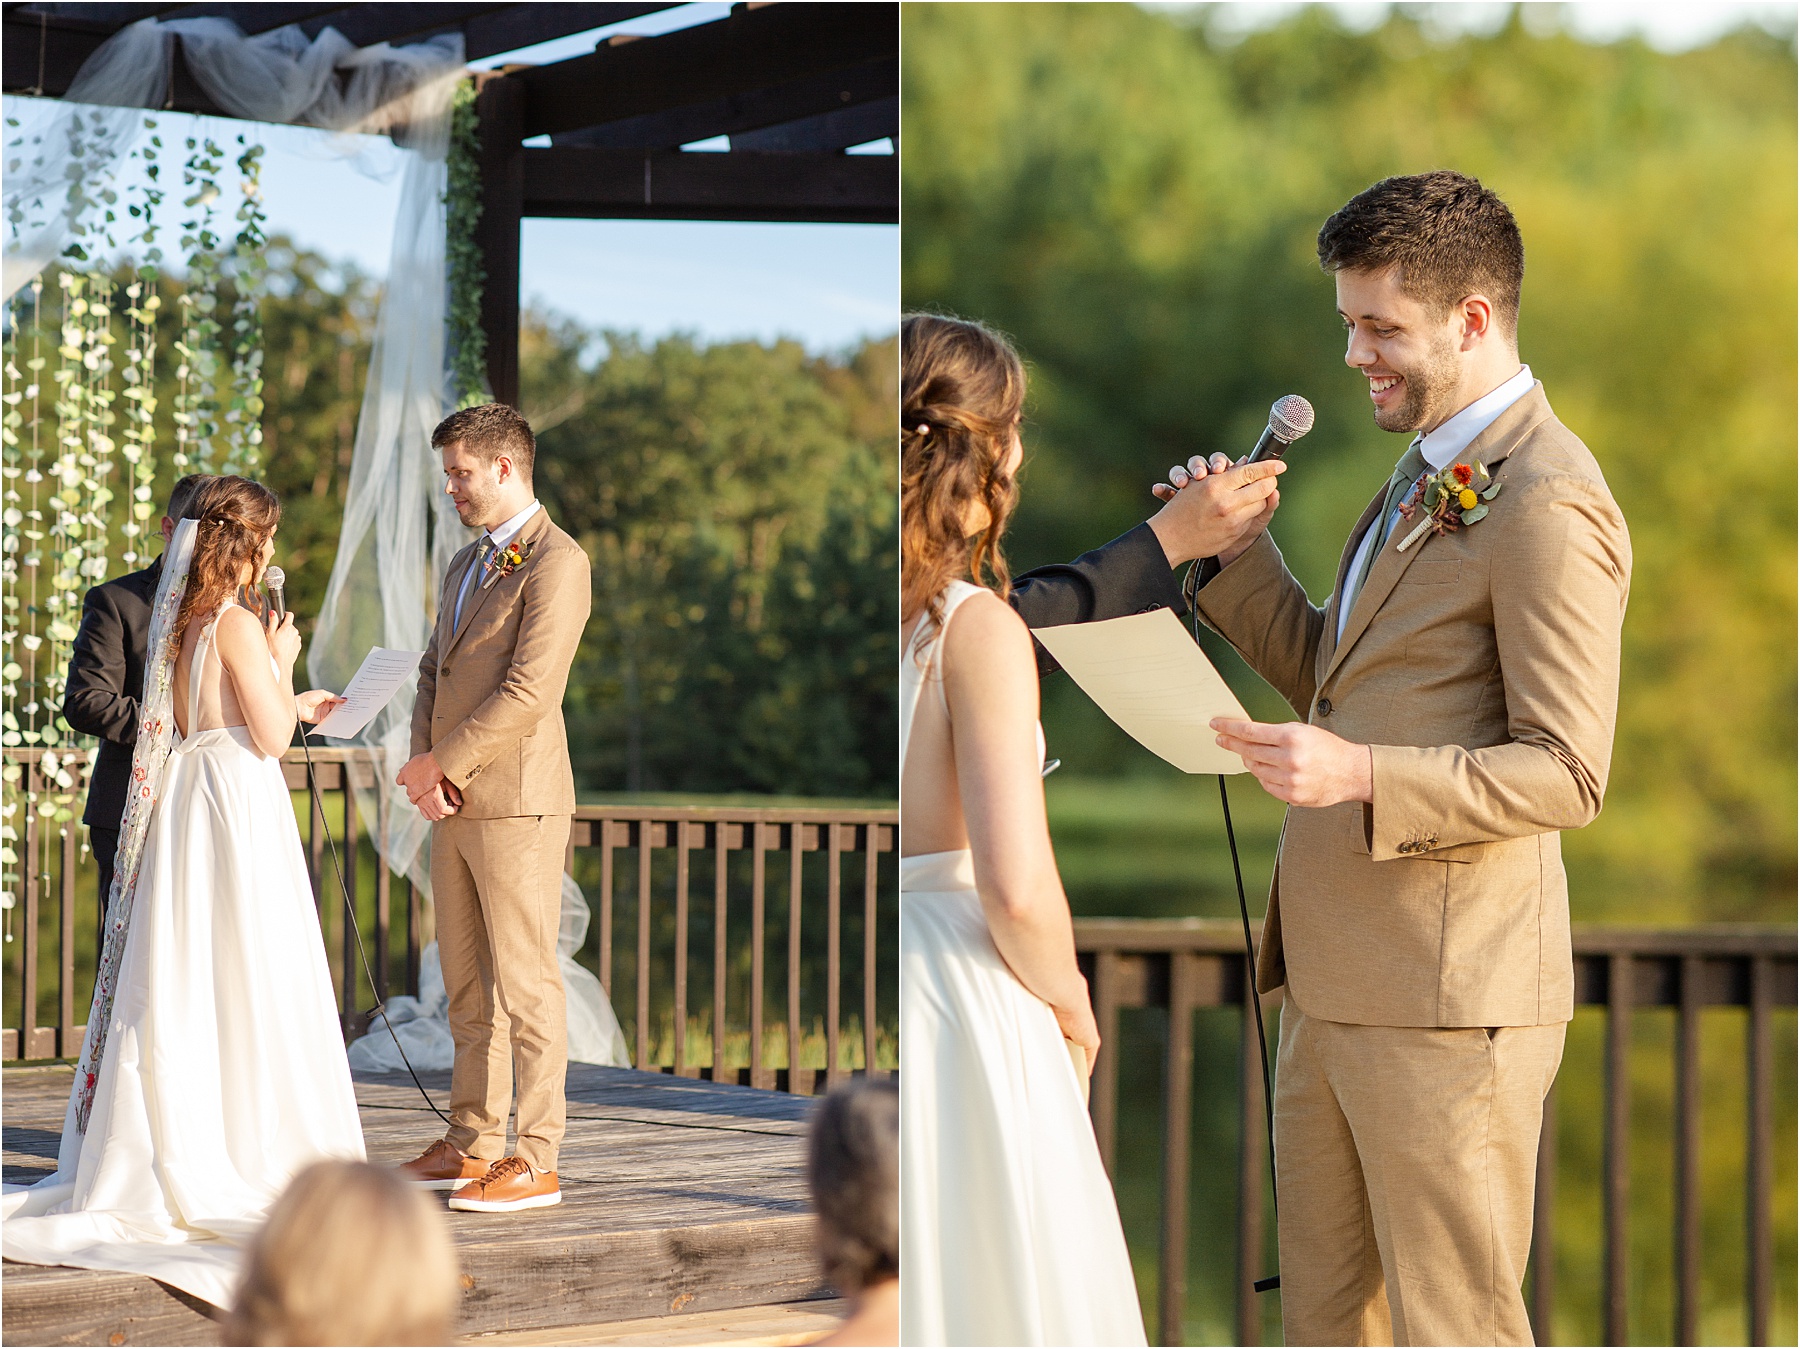 Groom holding microphone to give vows at his weding